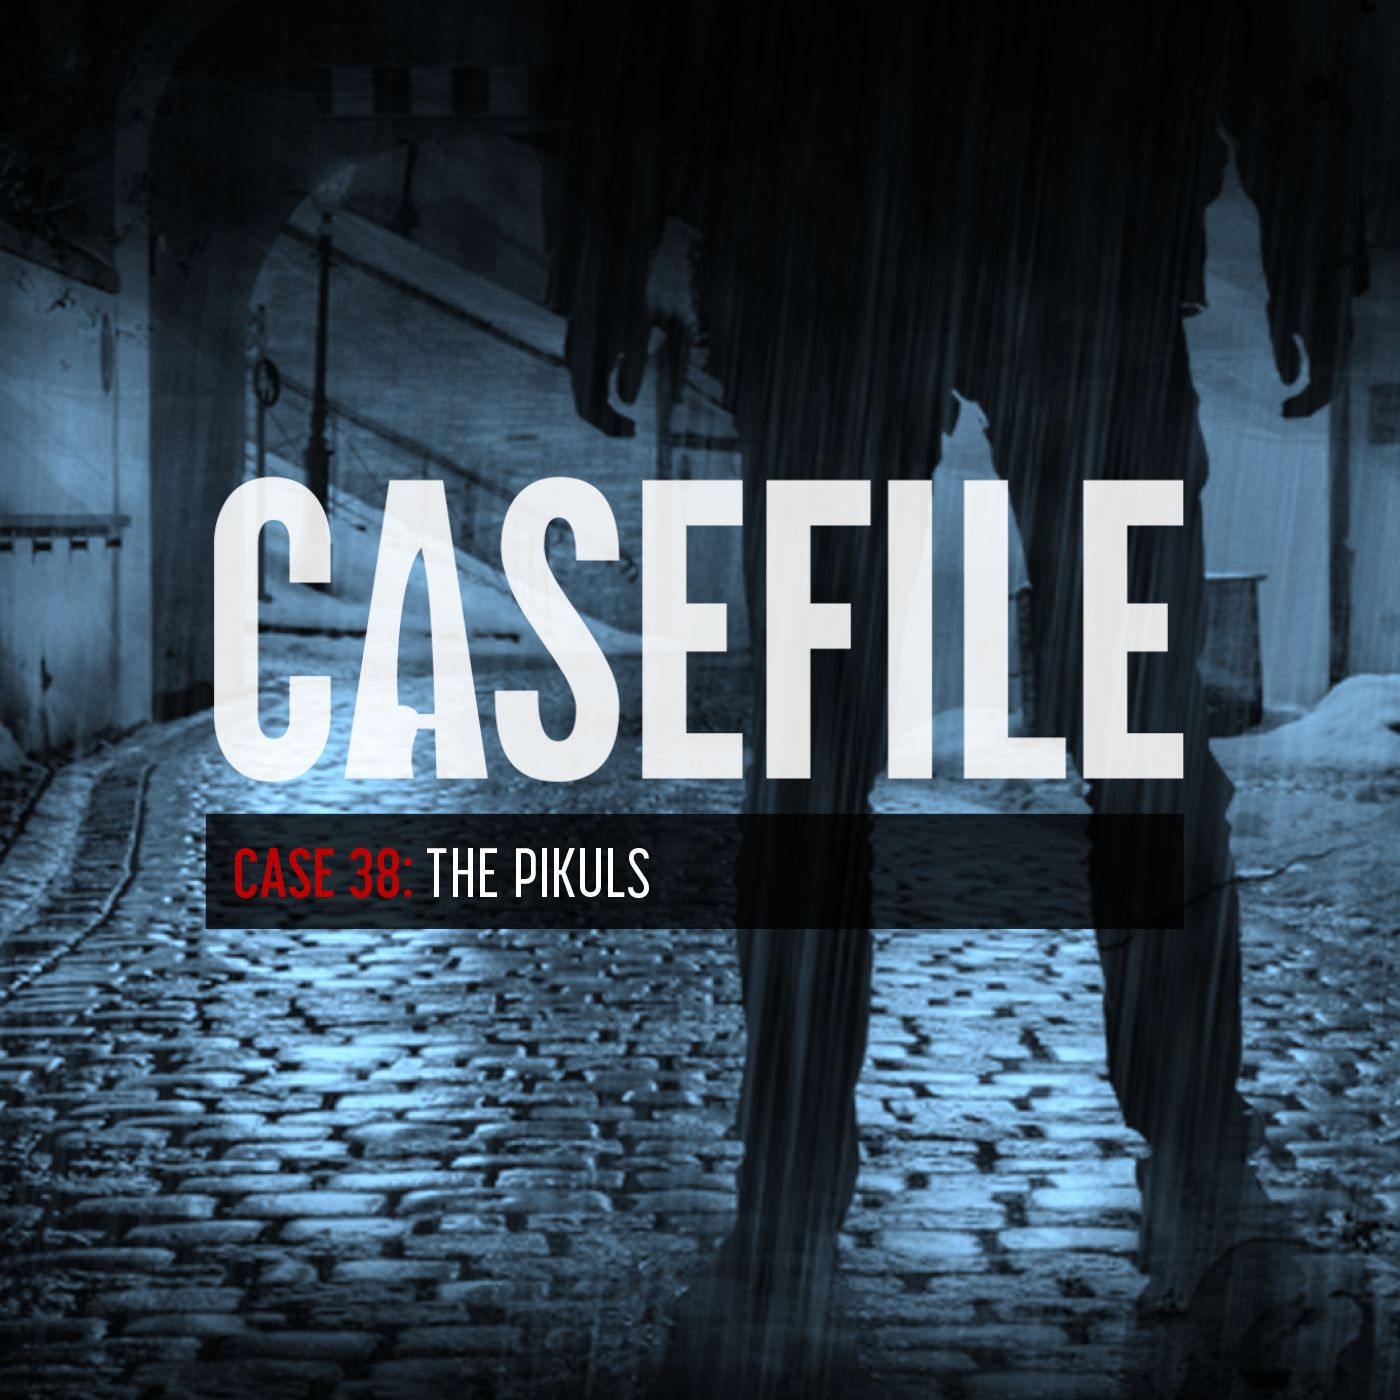 Case 38: The Pikuls